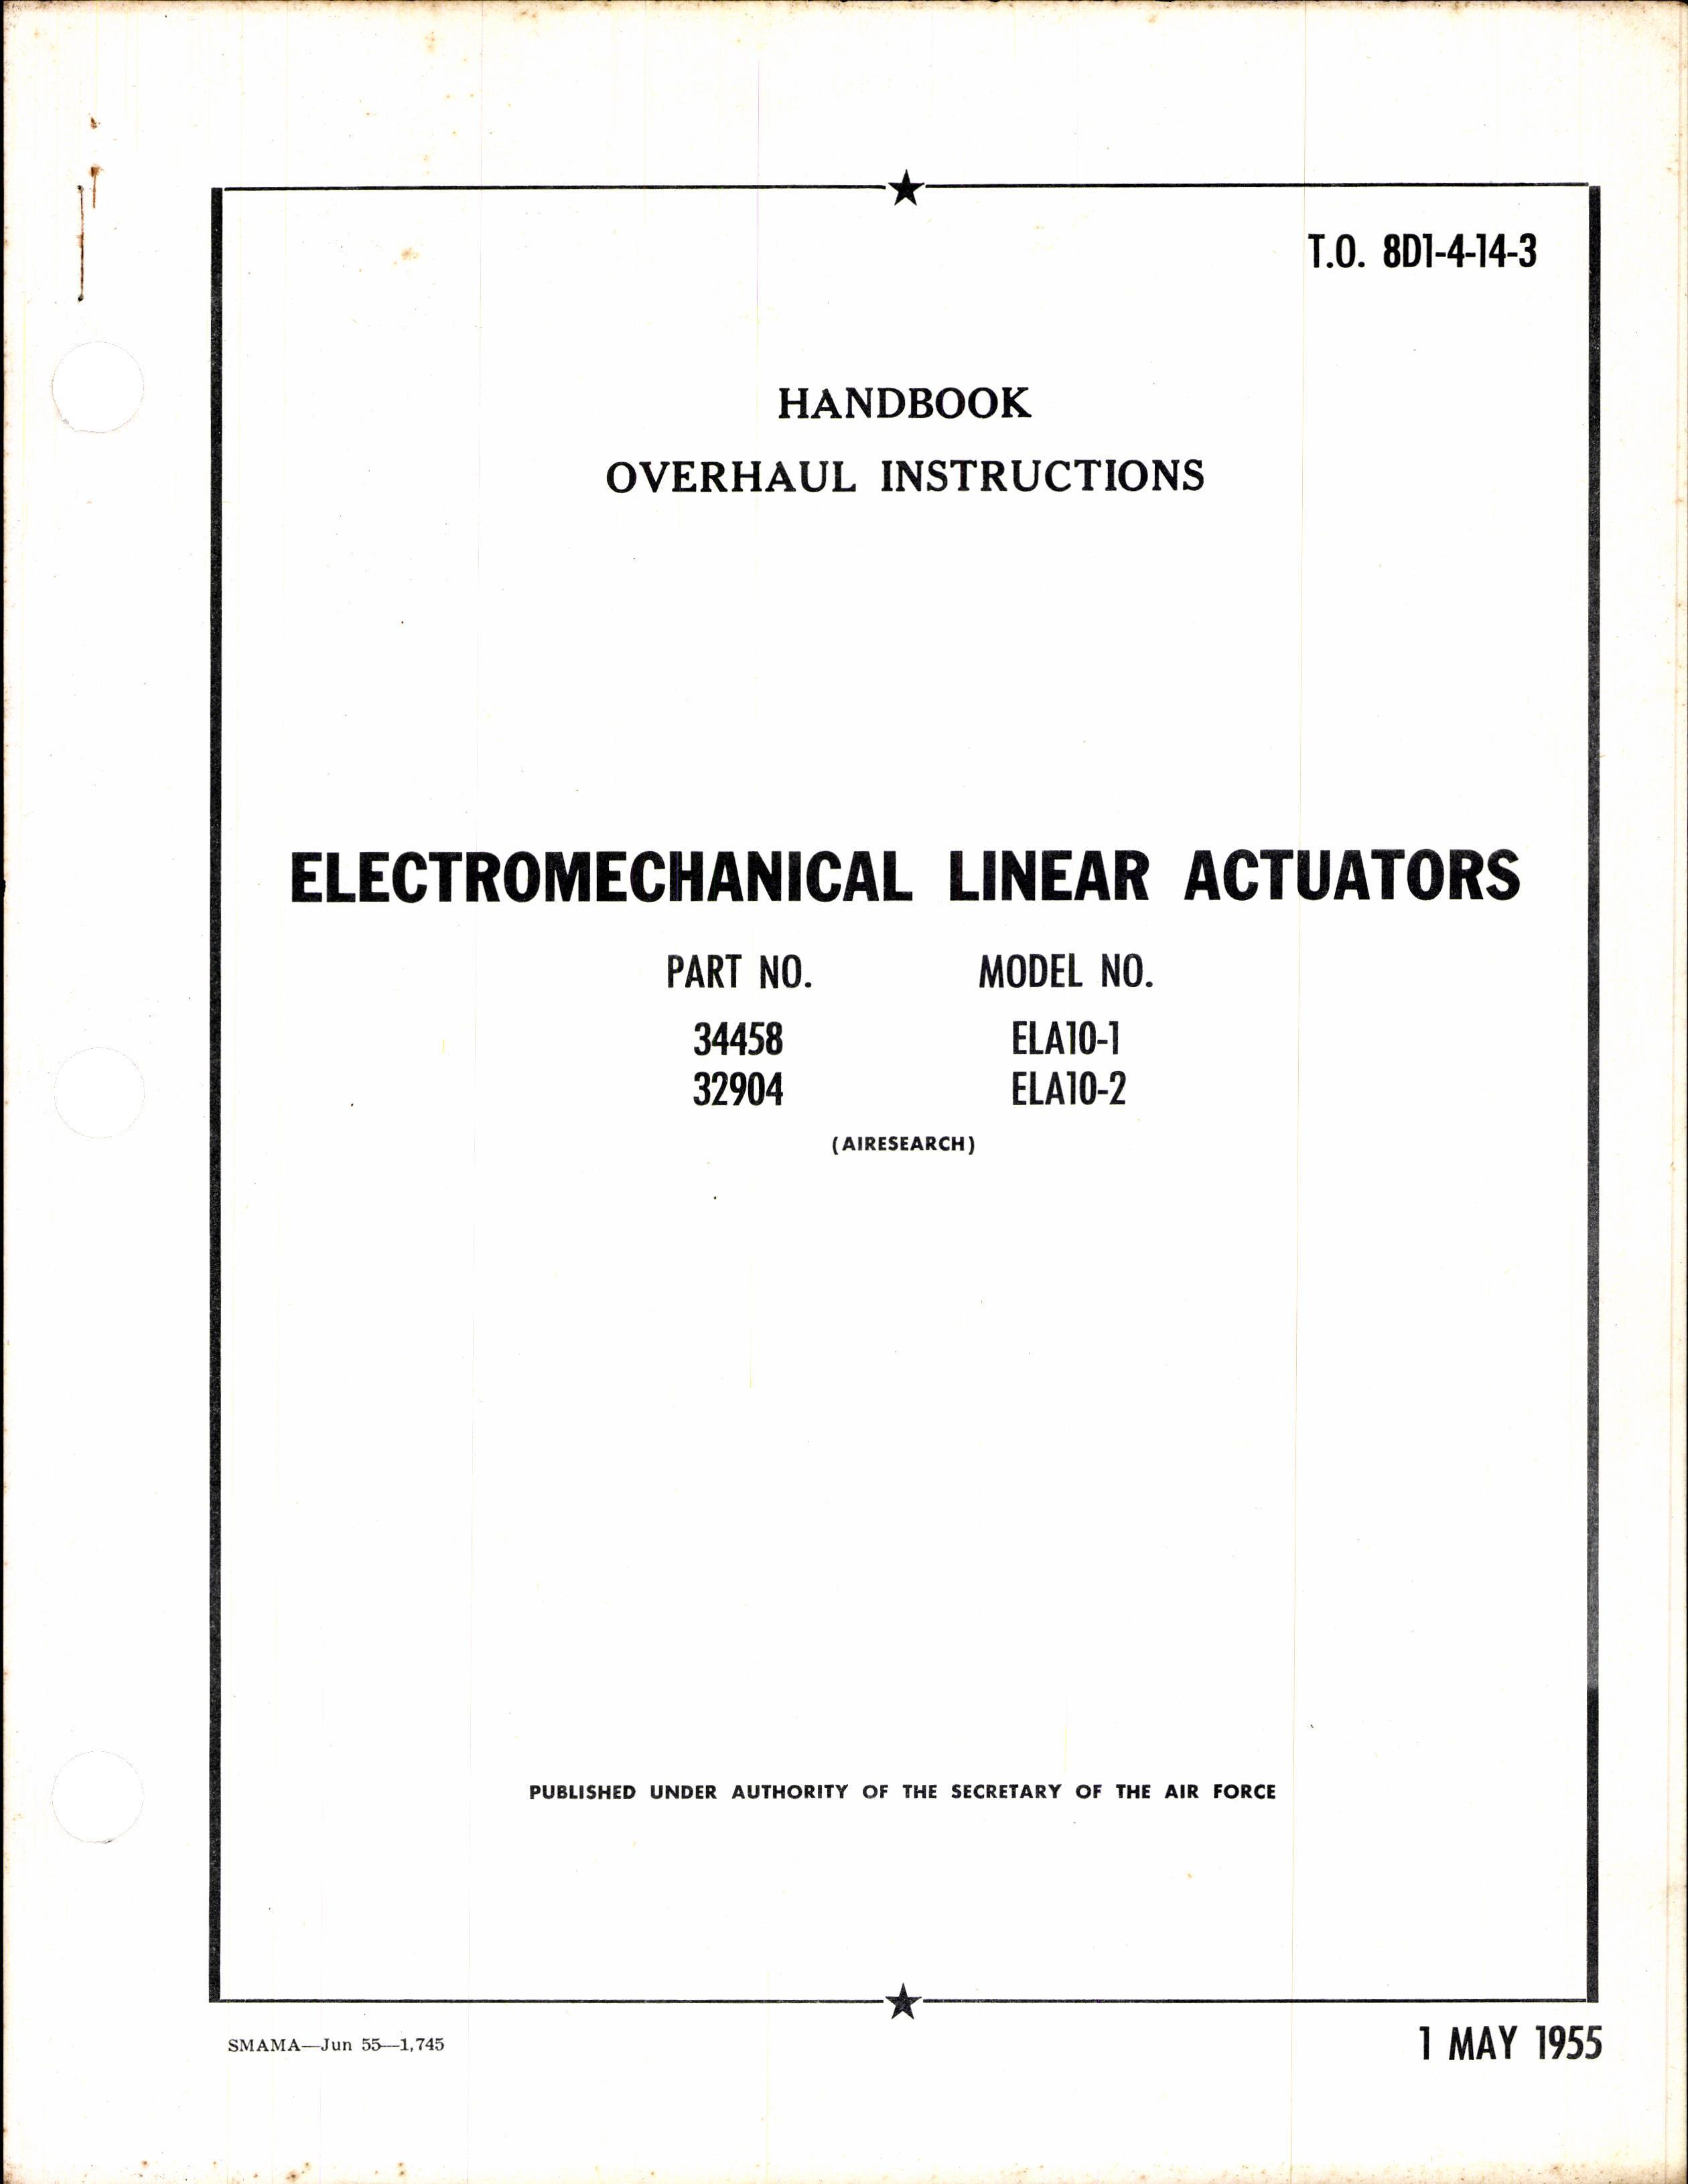 Sample page 1 from AirCorps Library document: Handbook Overhaul Instructions for Electromechanical Linear Actuators